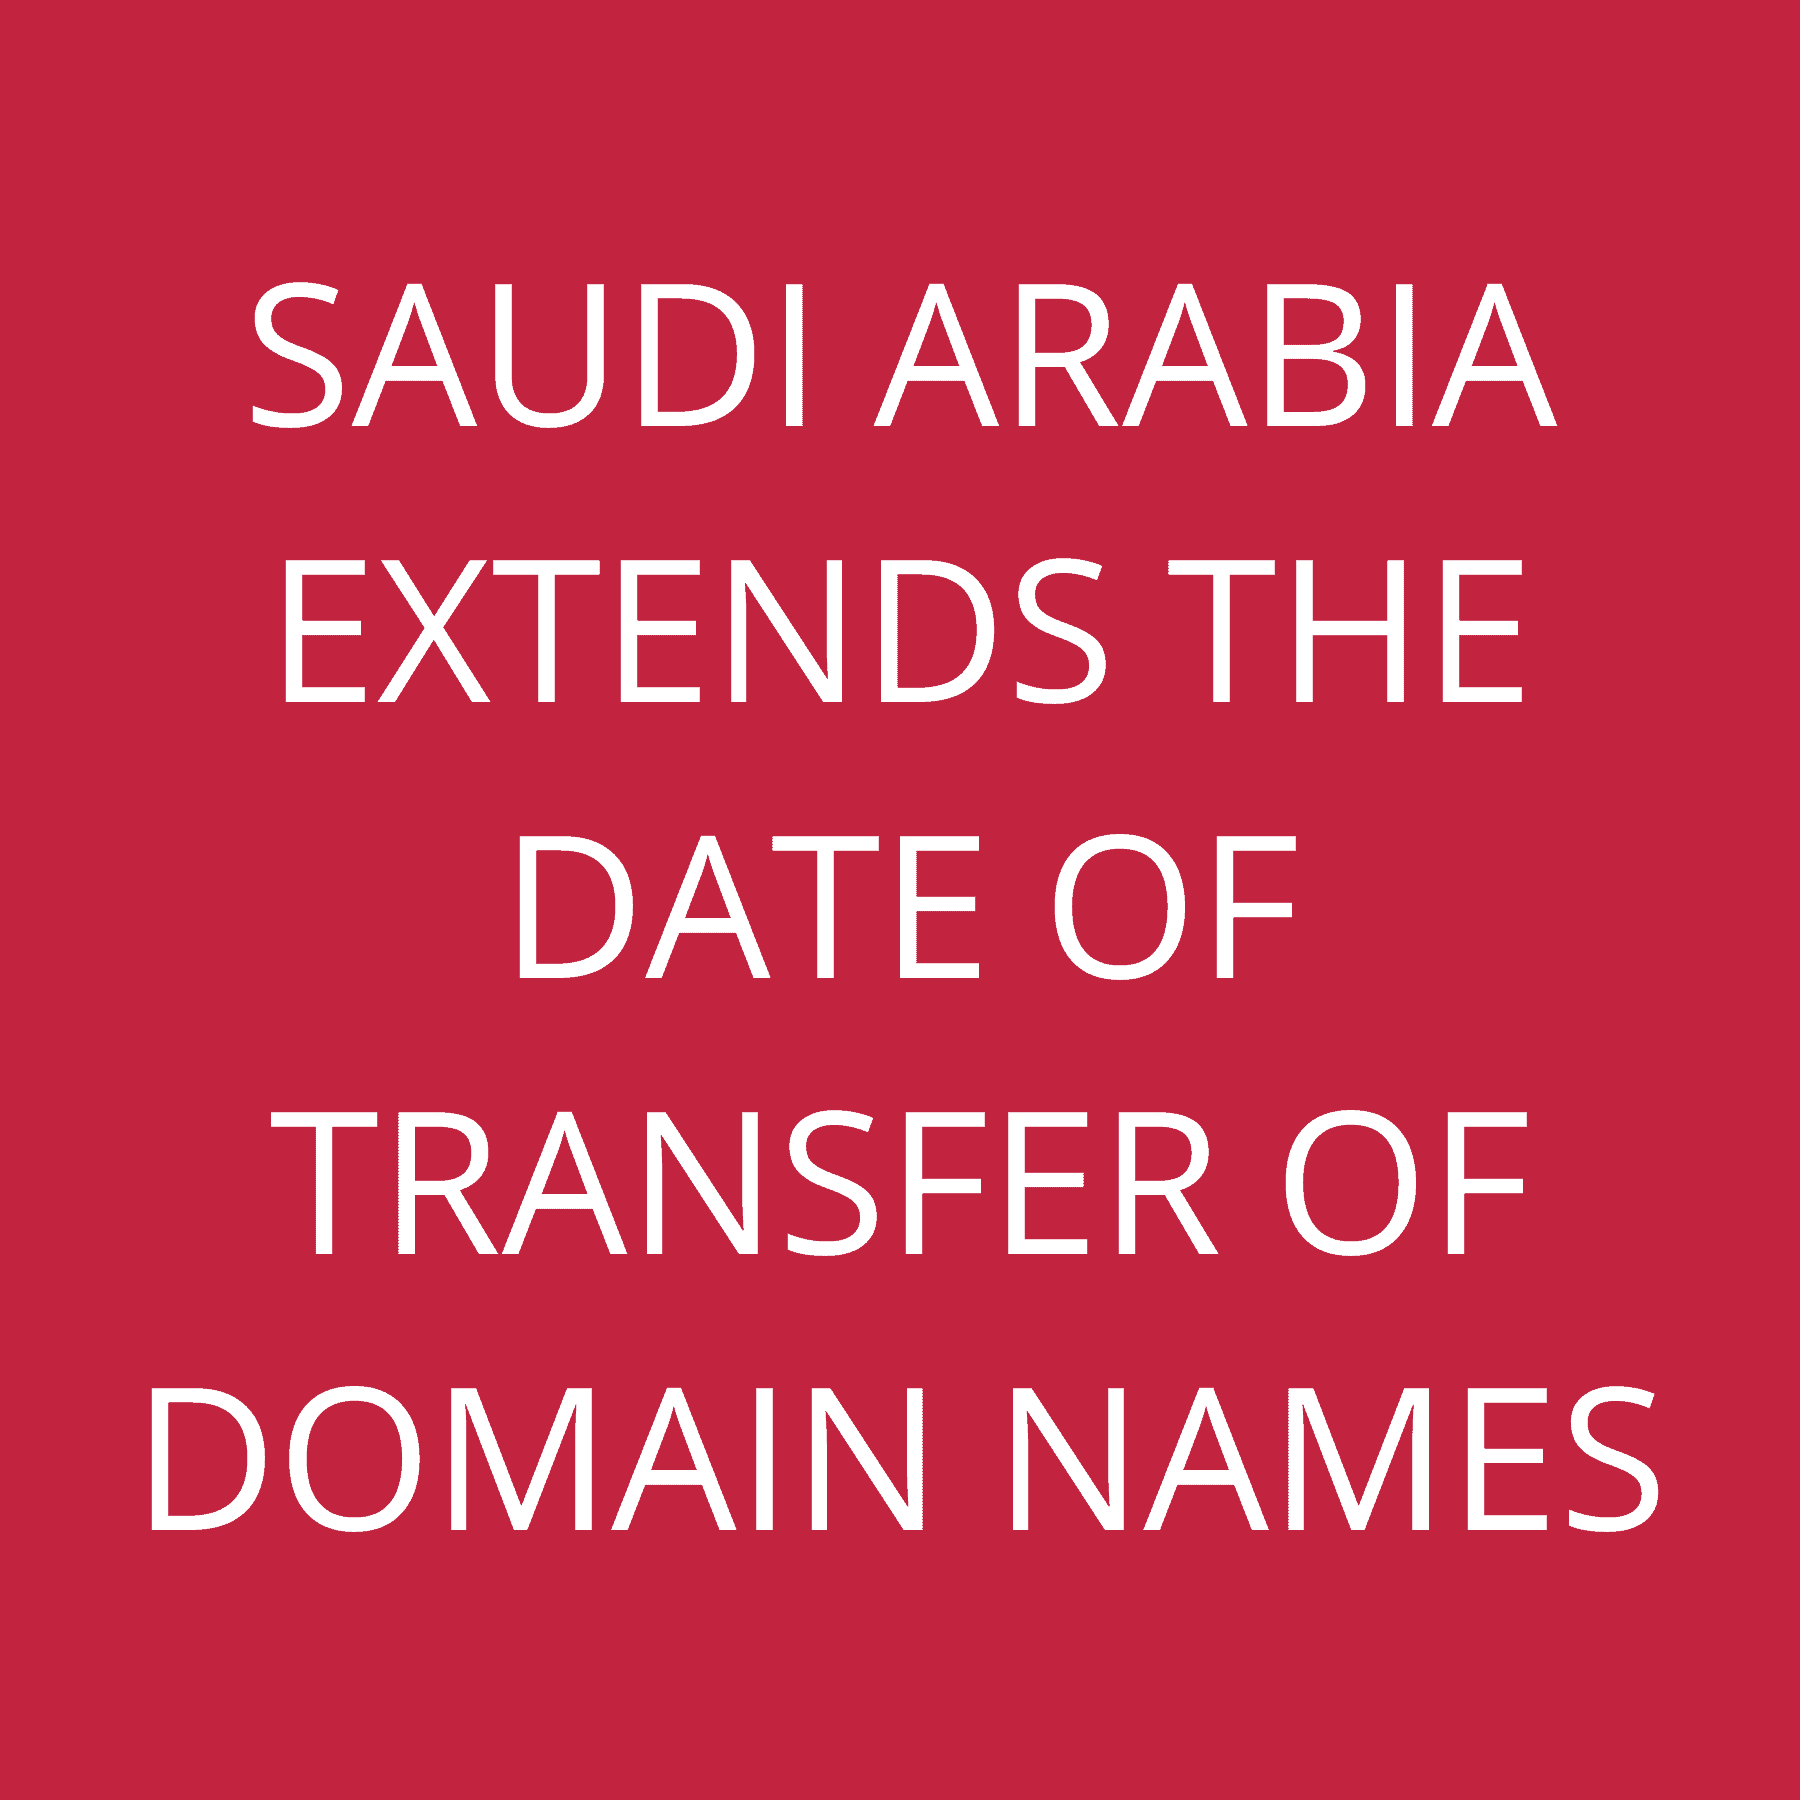 Saudi Arabia extends the date of transfer of domain names